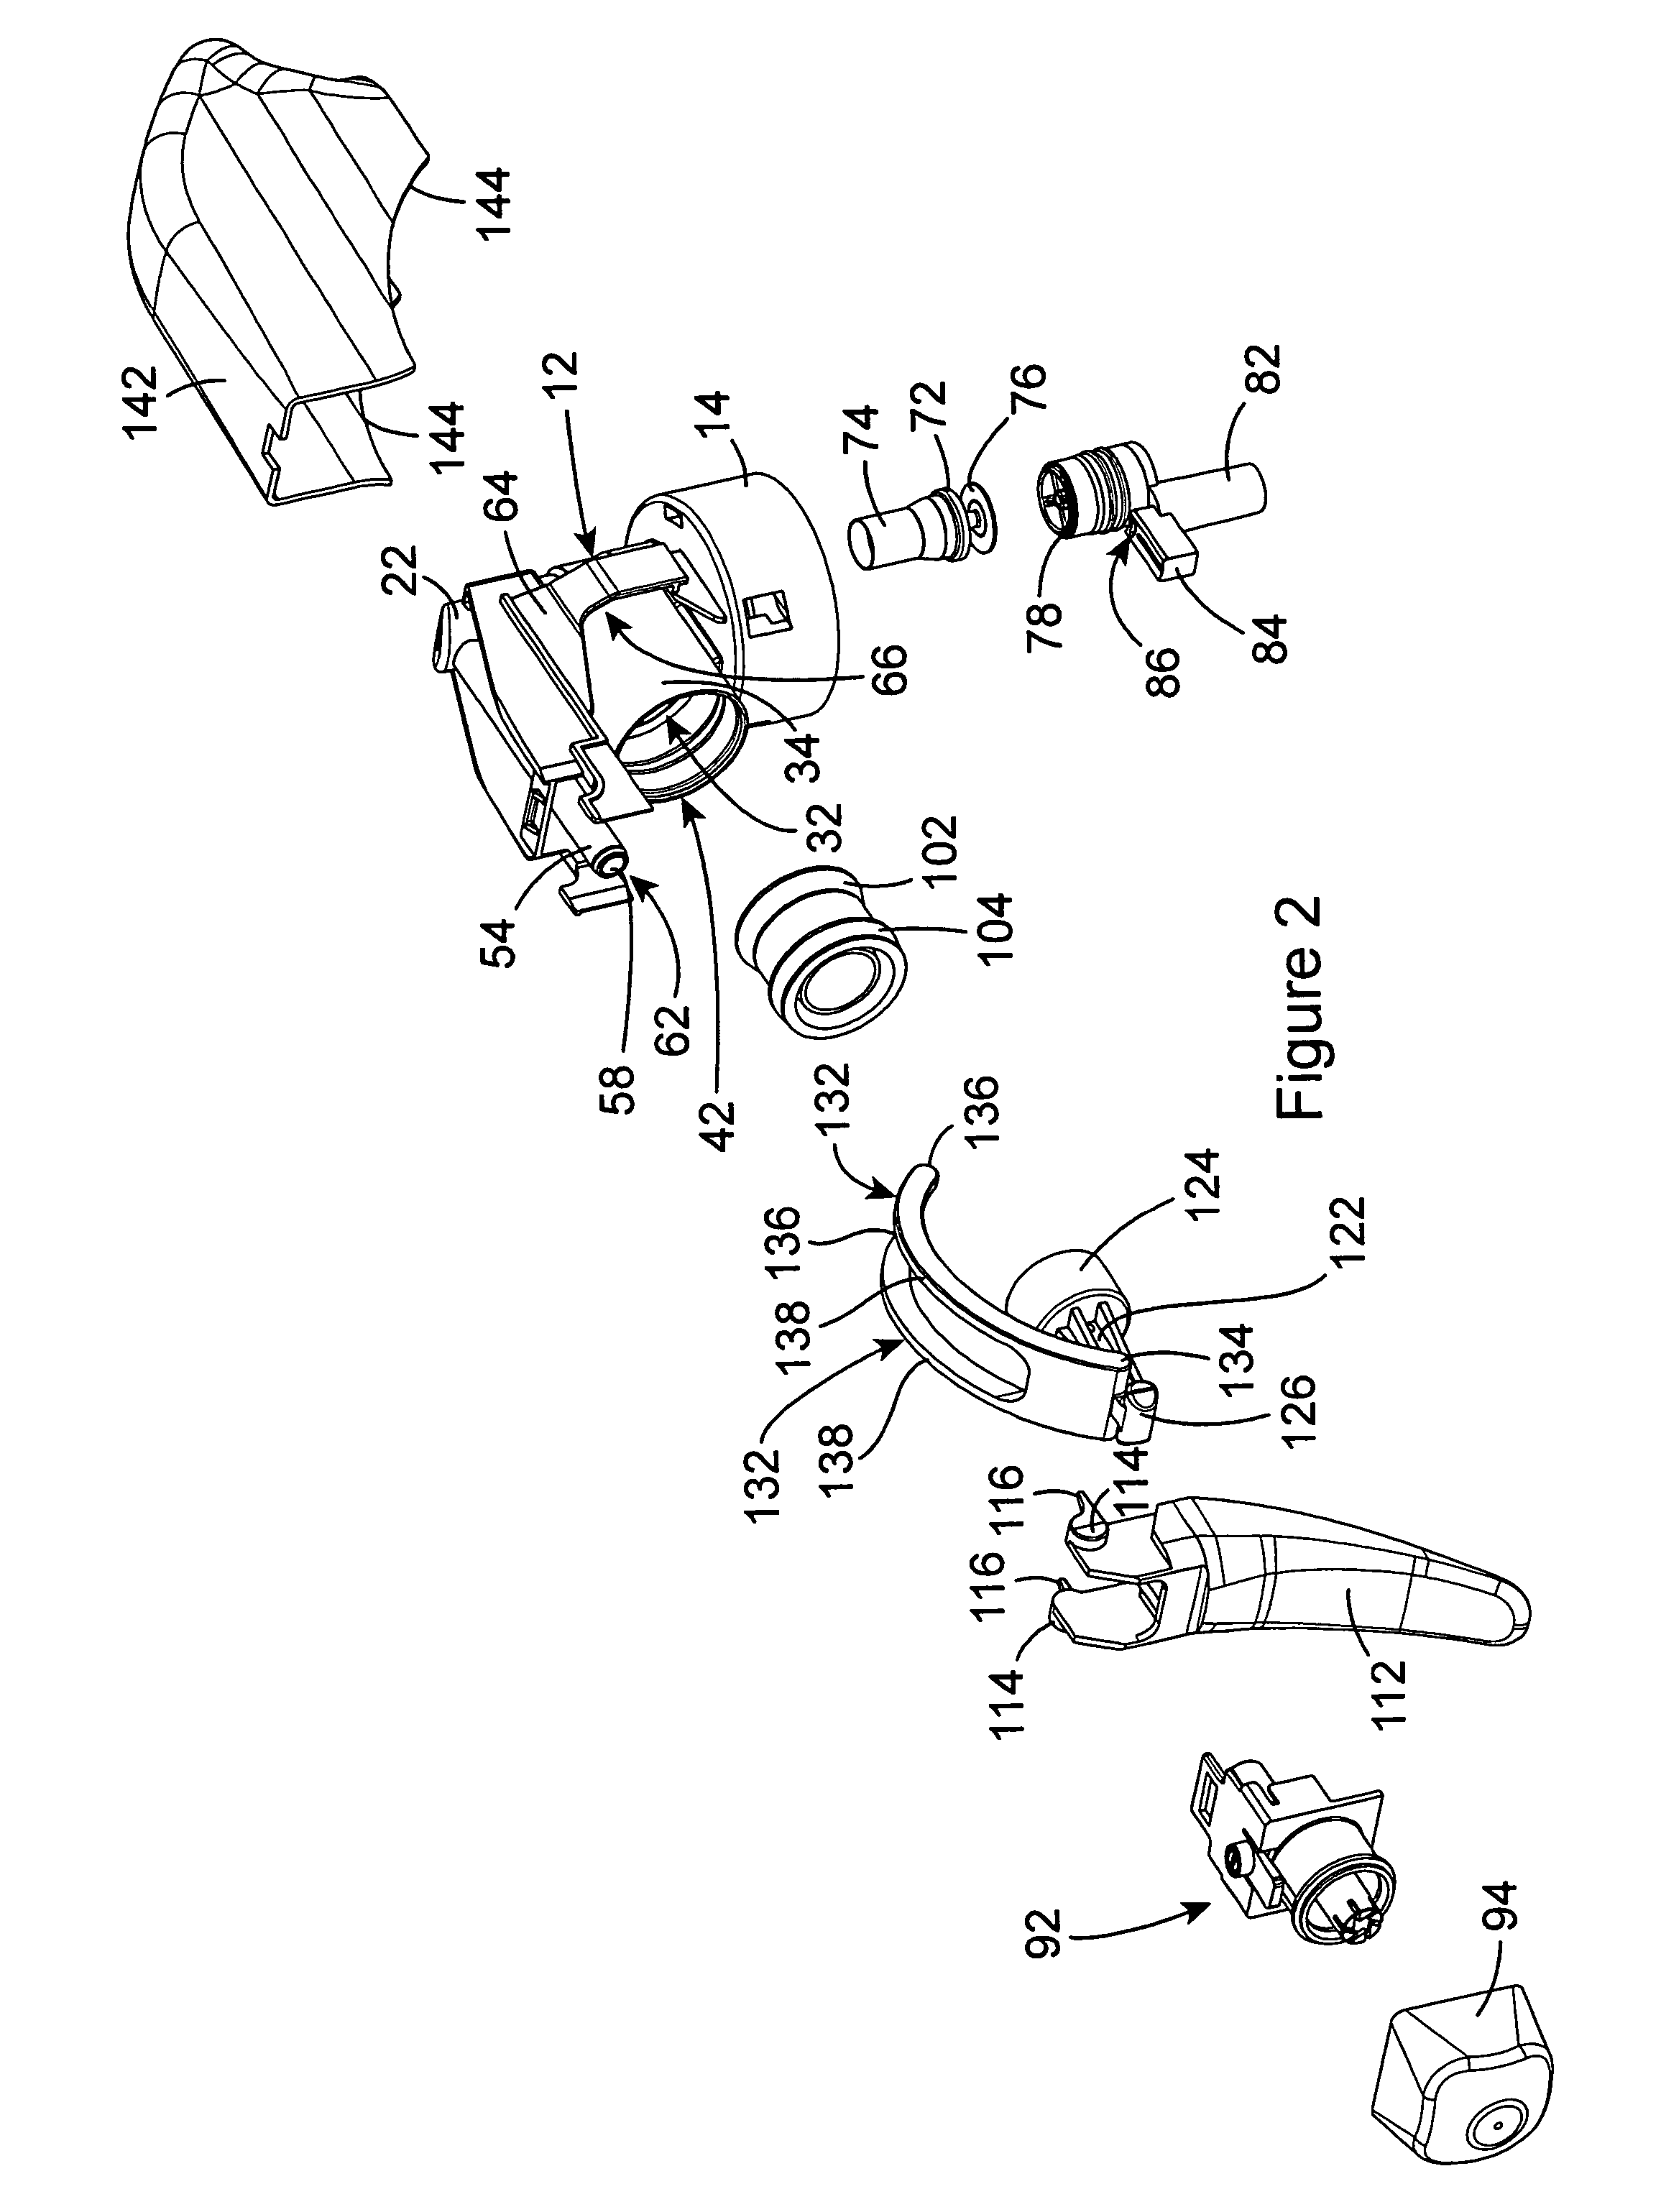 Trigger sprayer with integral piston rod and bowed spring